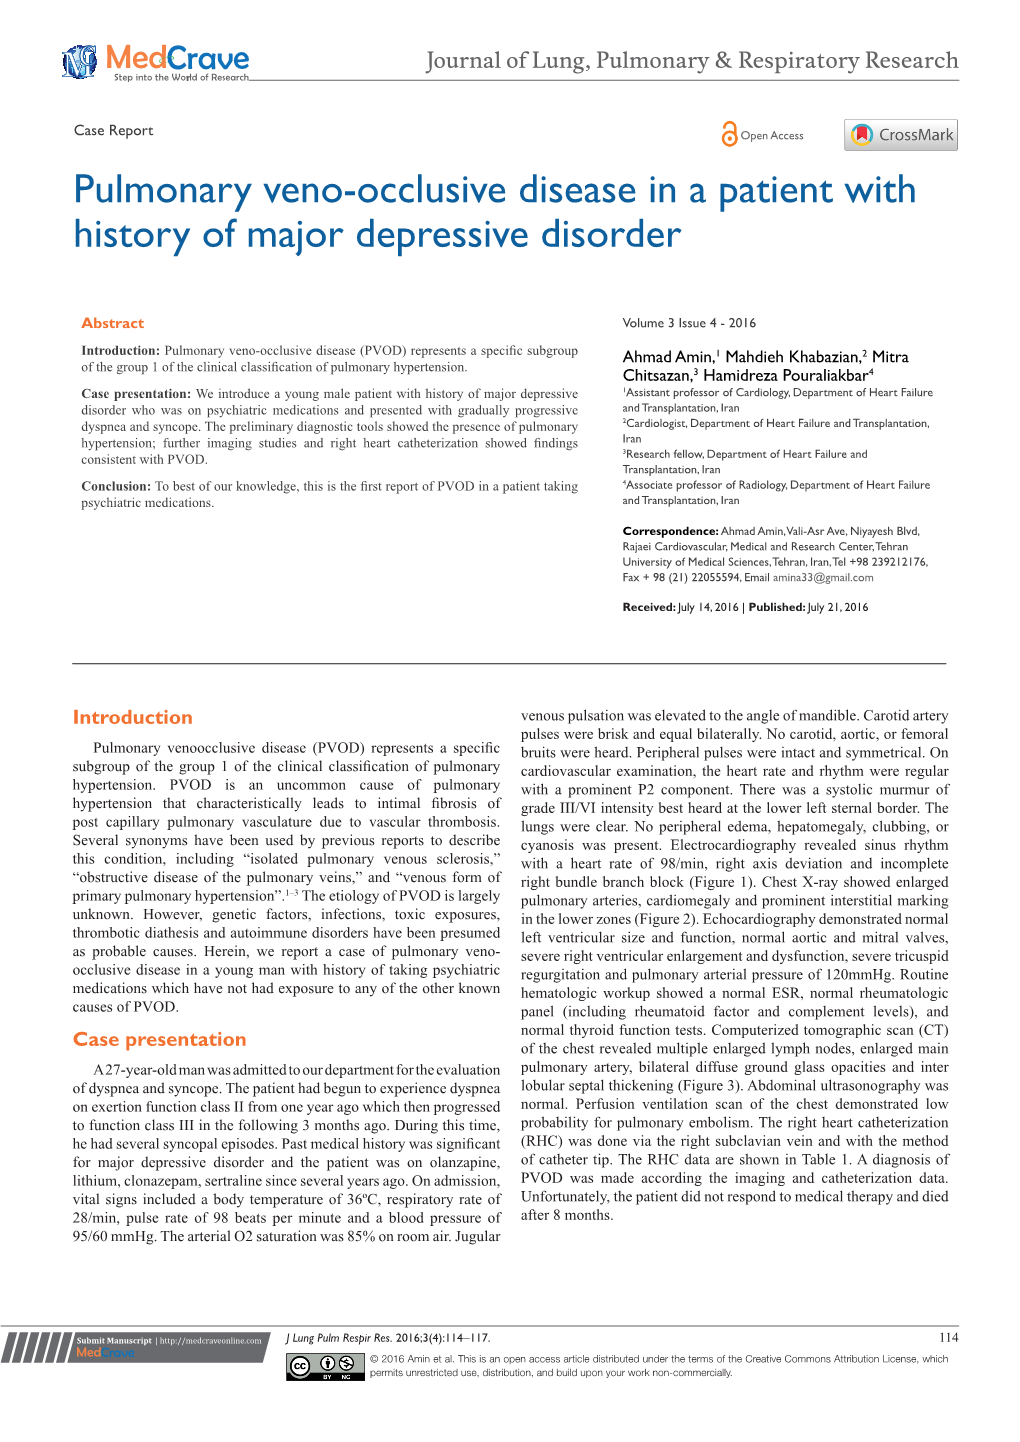 Pulmonary Veno-Occlusive Disease in a Patient with History of Major Depressive Disorder